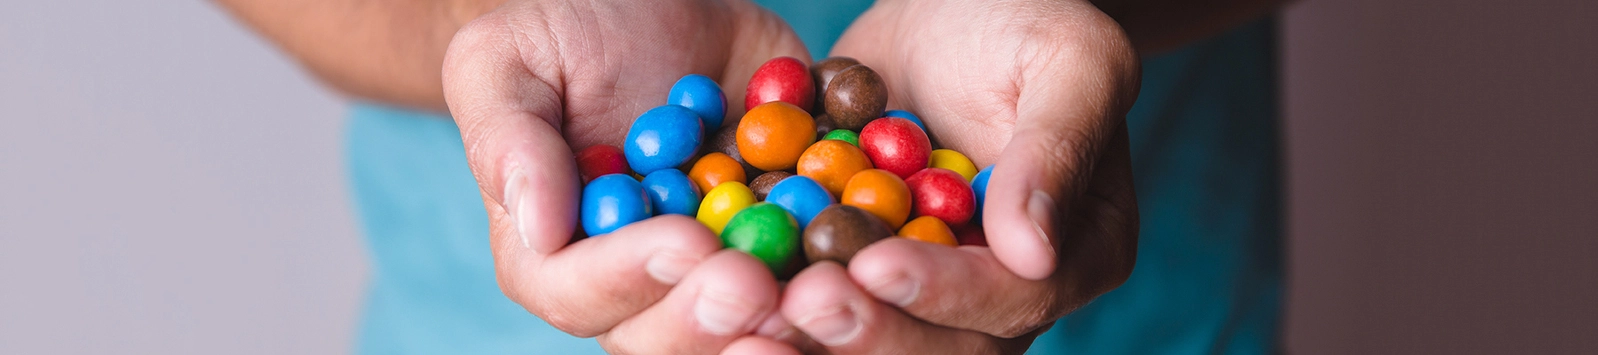 Male hands holding colored candies